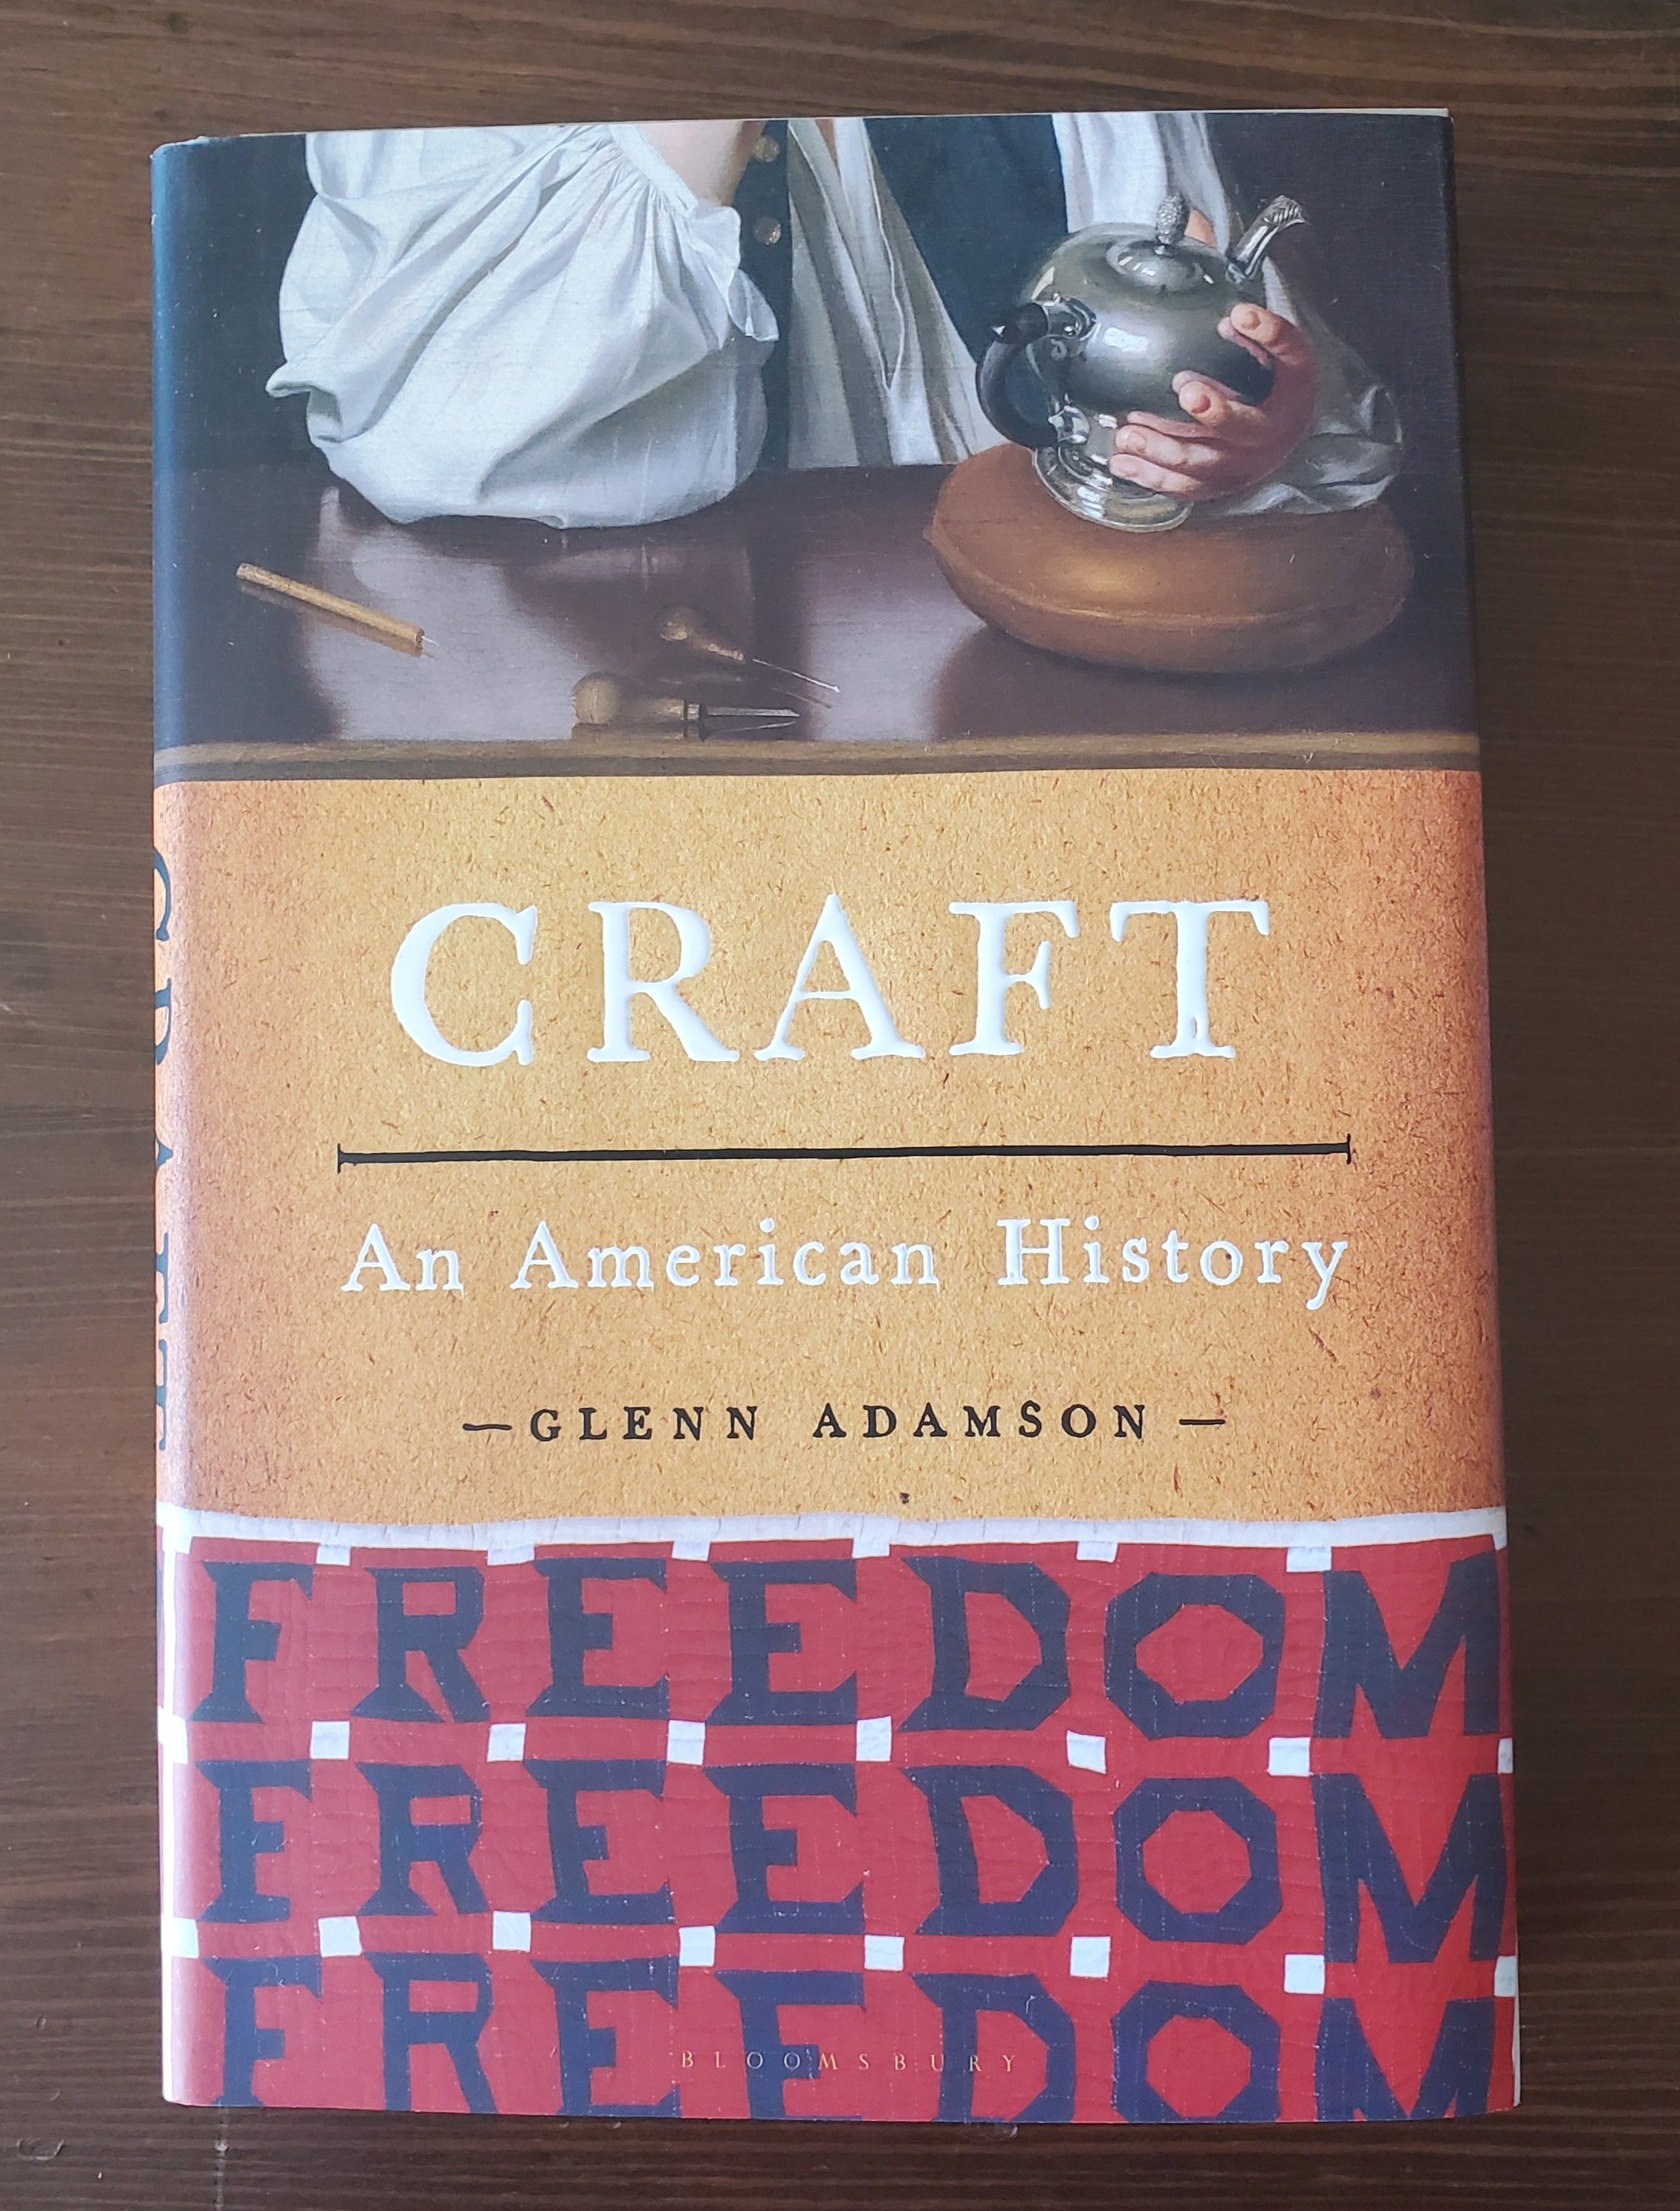 Craft: An American History